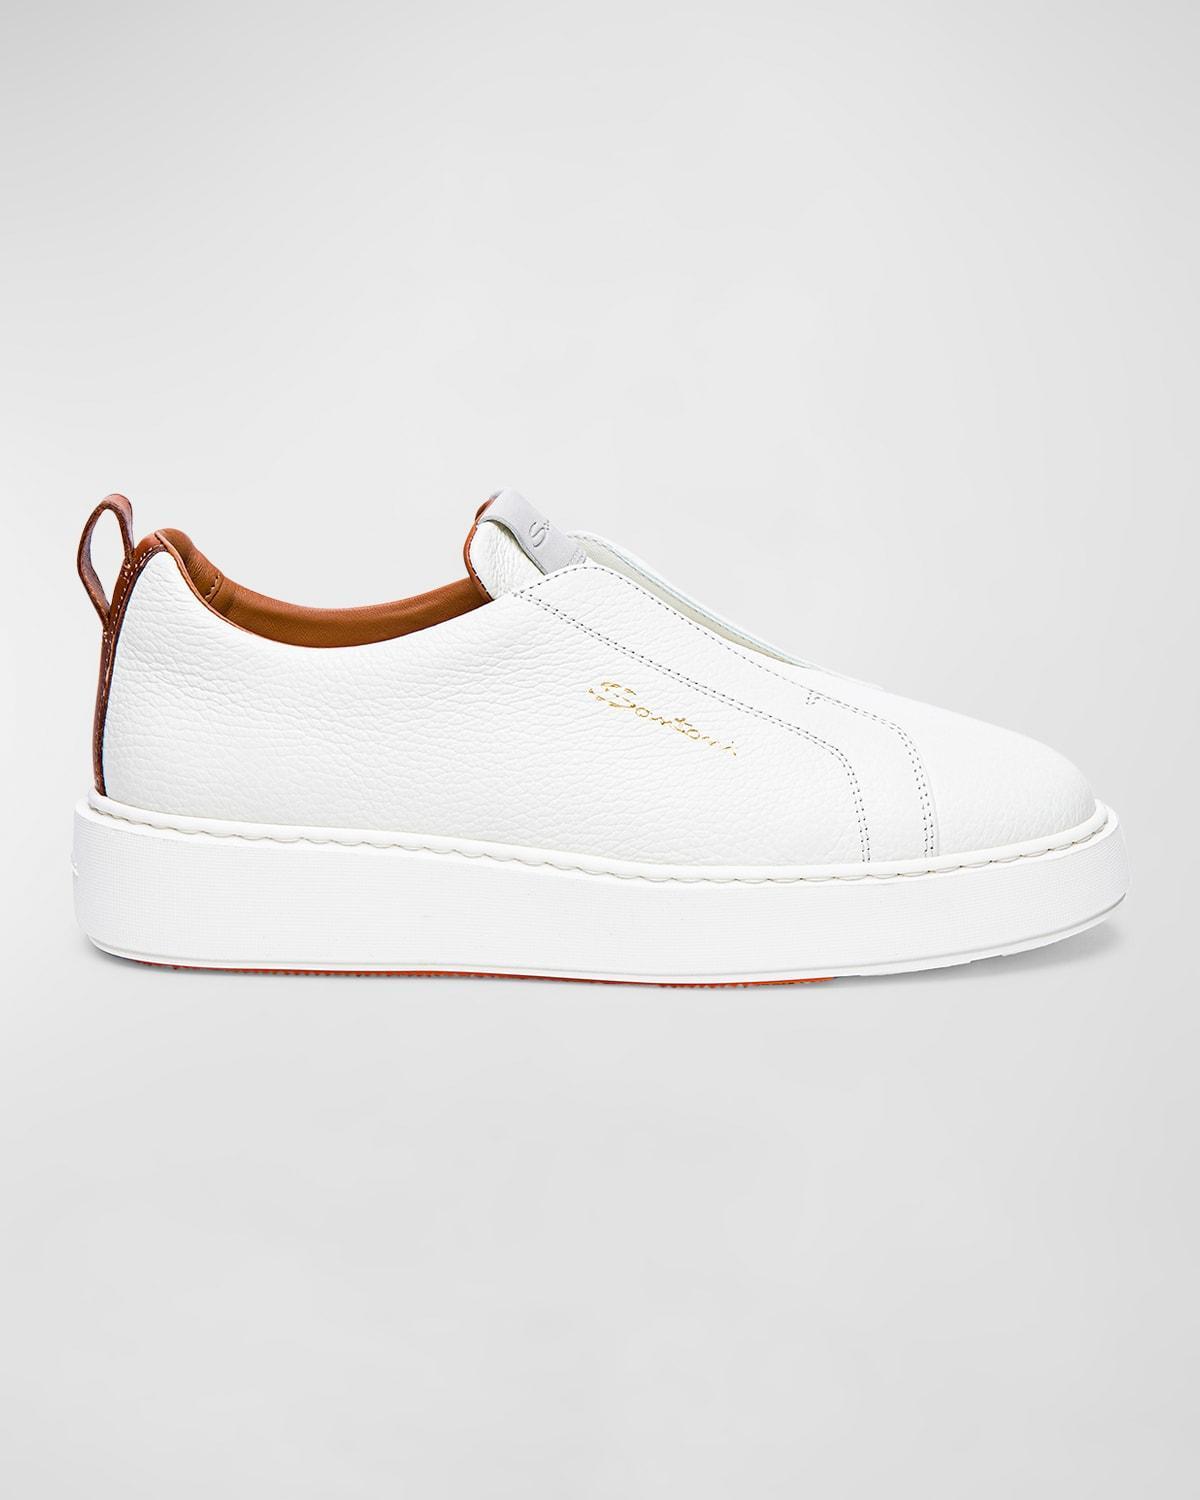 Womens Vicky Leather Slip-On Sneakers Product Image